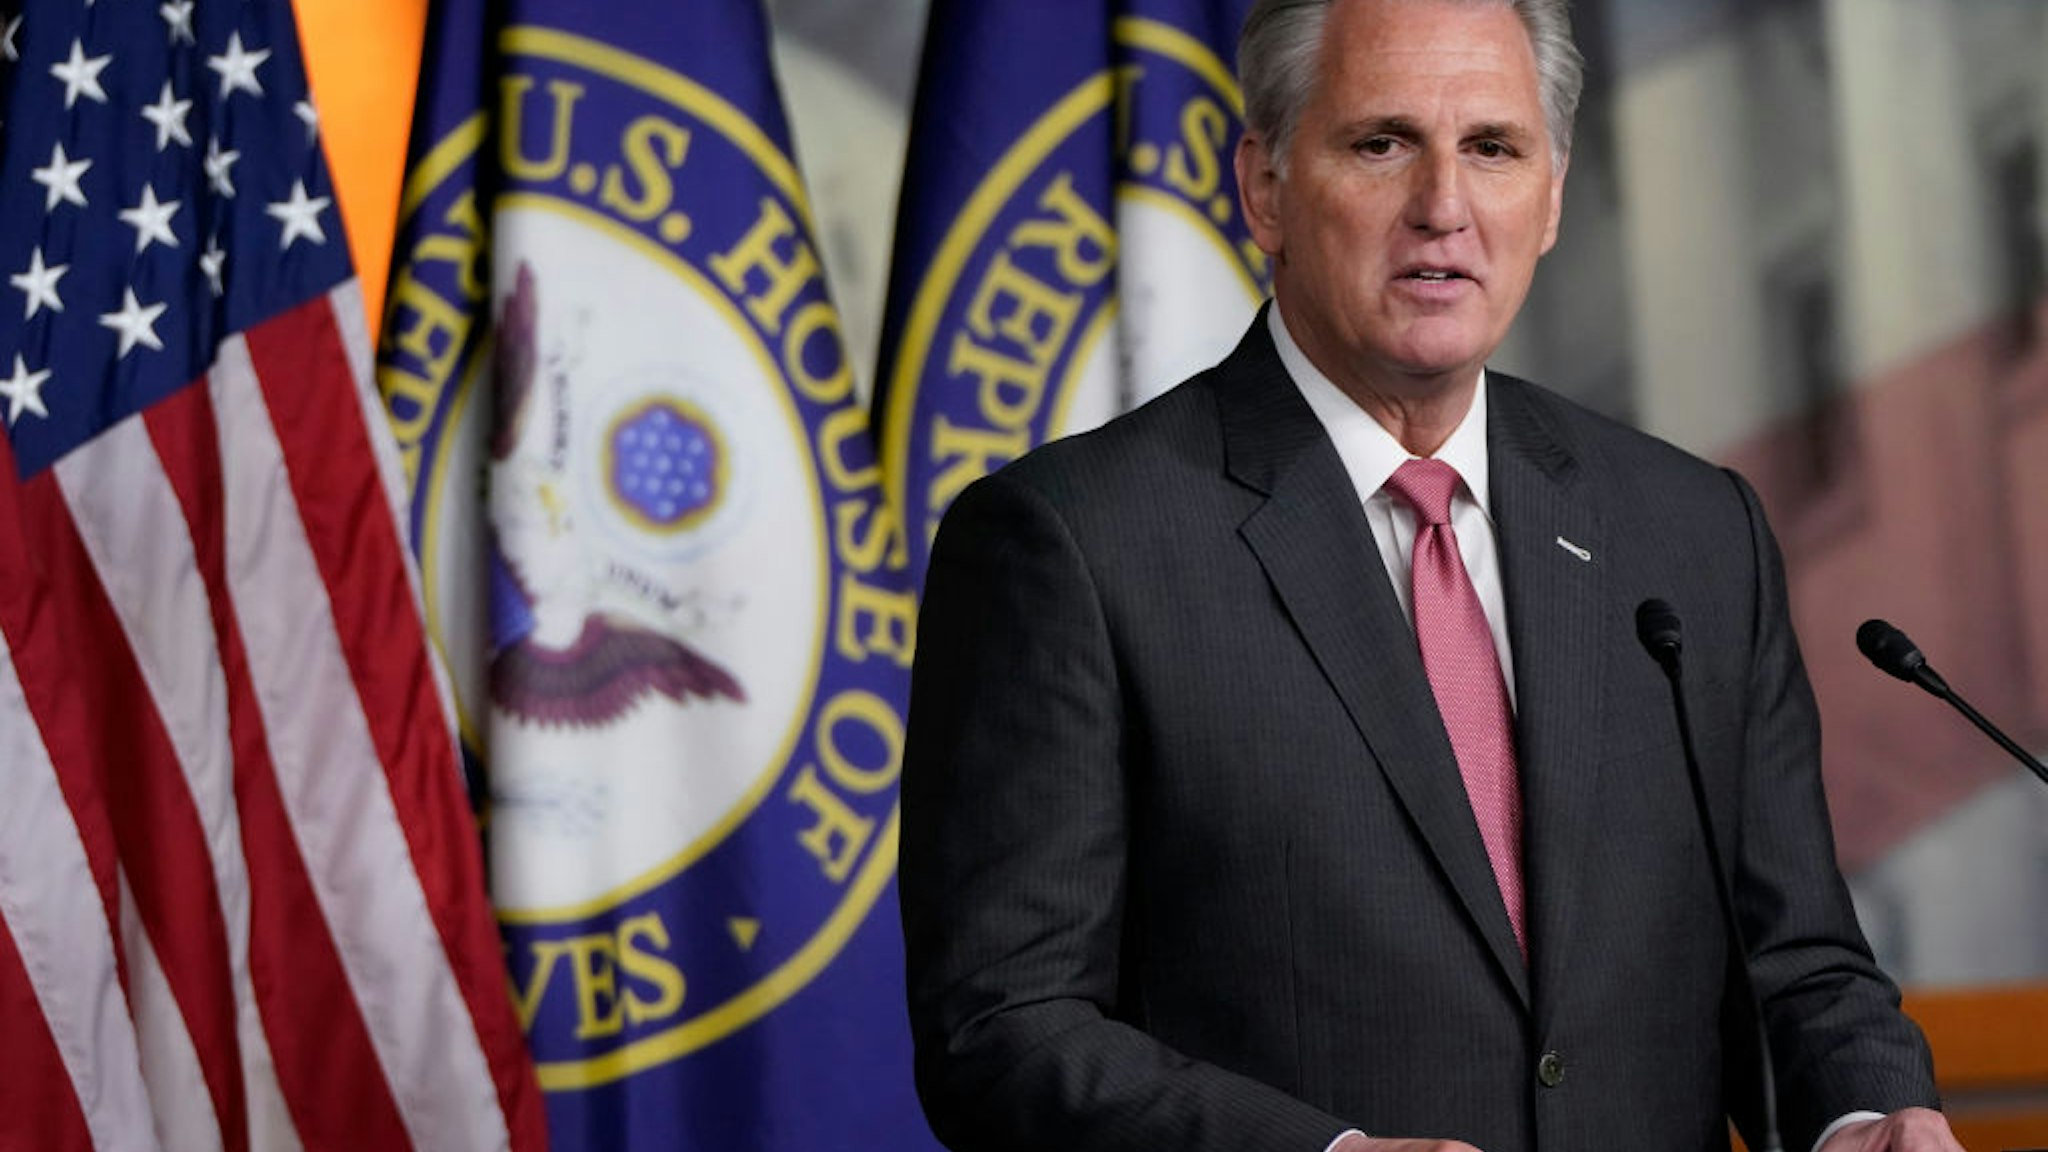 House Minority Leader Kevin McCarthy (R-CA) answers questions during a press conference at the U.S. Capitol on January 09, 2020 in Washington, DC. McCarthy answered a range of questions related primarily to the House articles of impeachment being sent to the U.S. Senate.